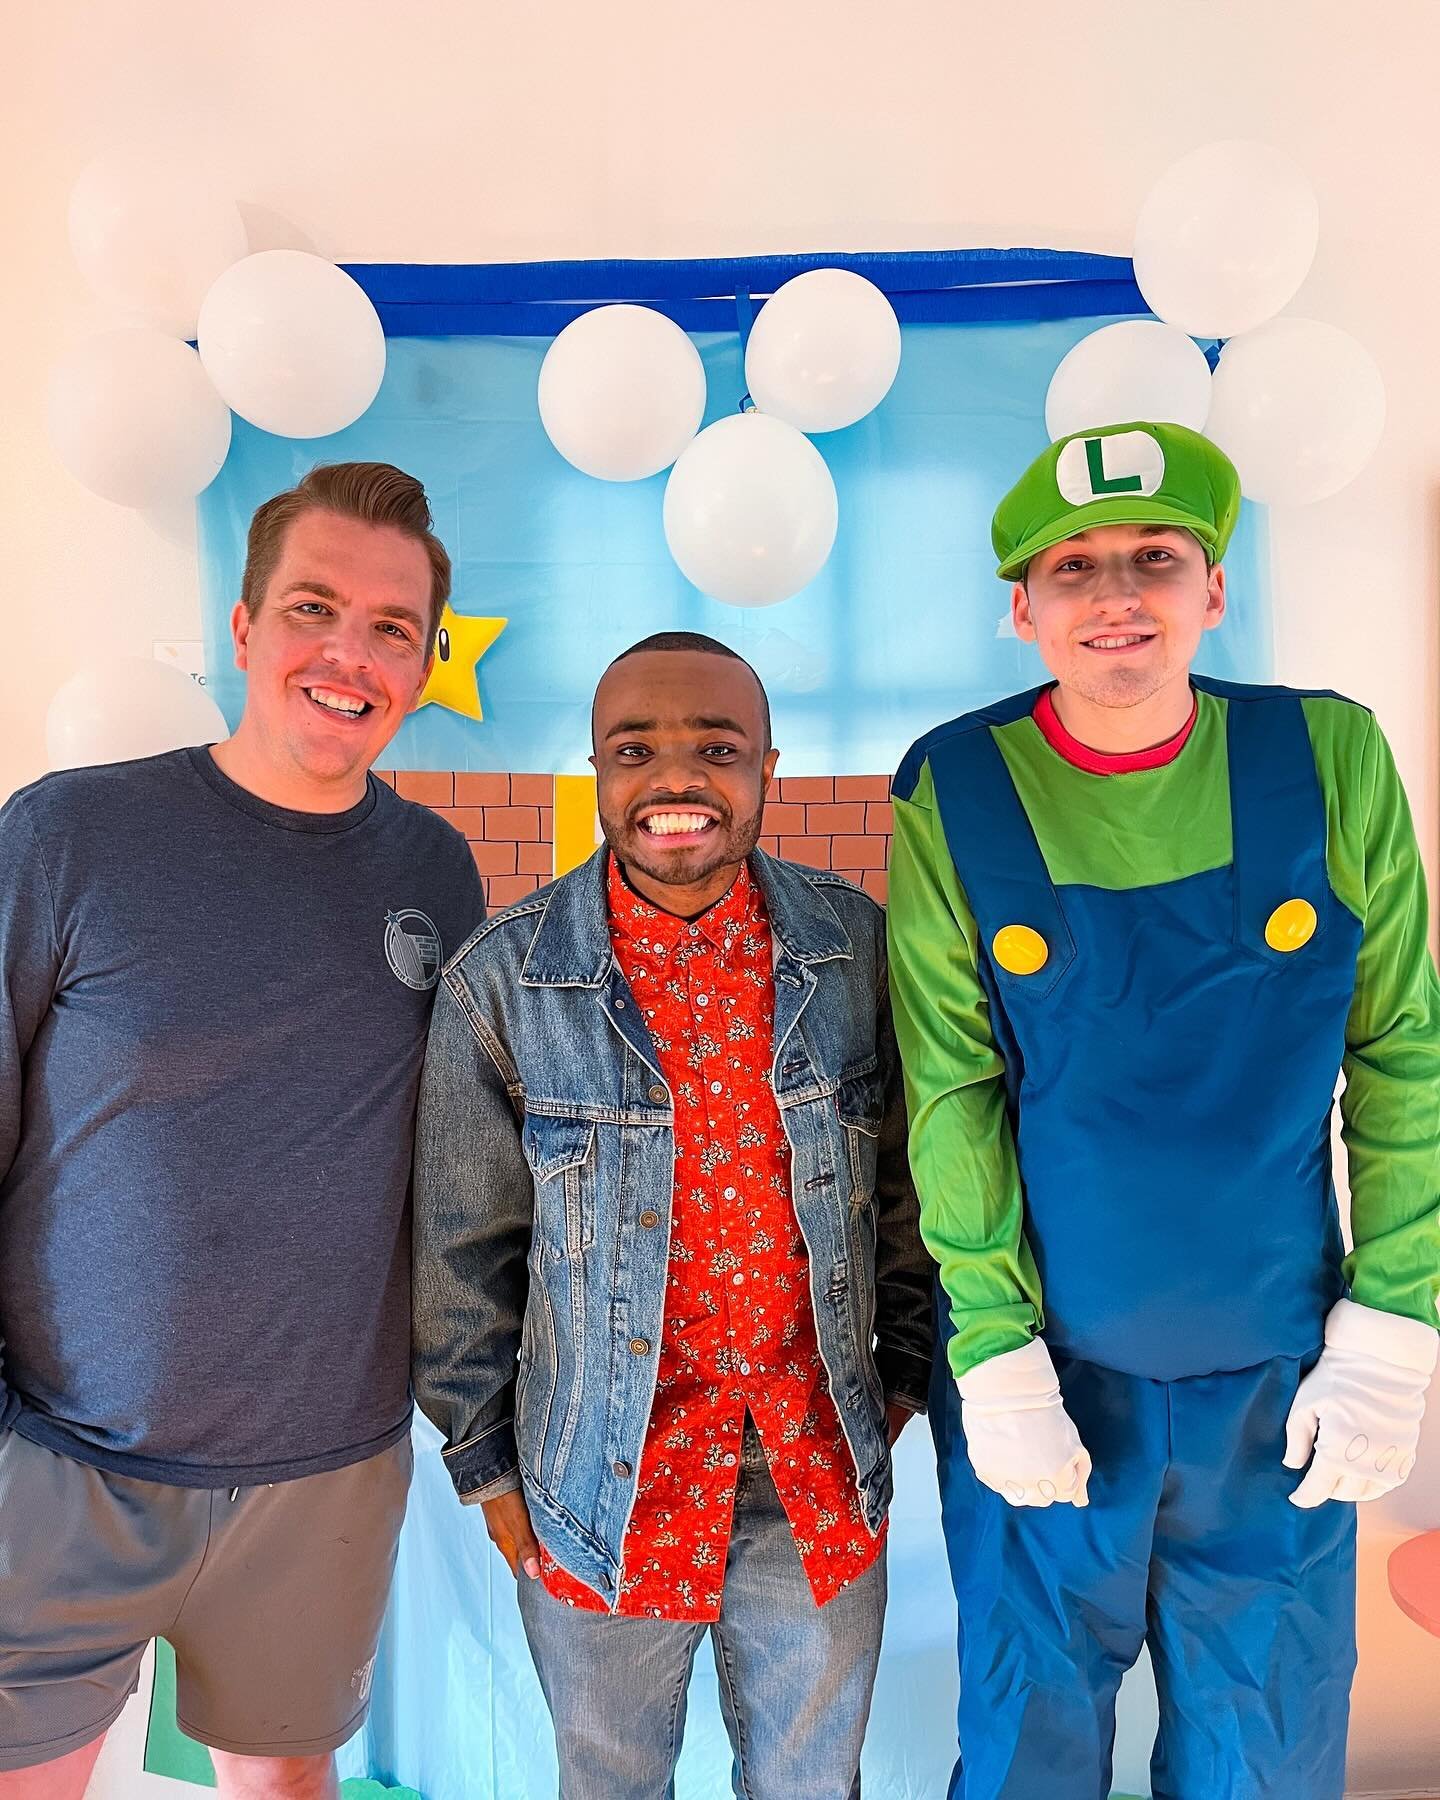 Ain&rsquo;t no party like an Alumni Party. 

We had so much fun leaning into our Super Mario themed mixer last night! We had themed foods, a photo wall, karaoke (PEACHES! 🎤), 🎮 (of course), and a scooter competition with a course just like the game